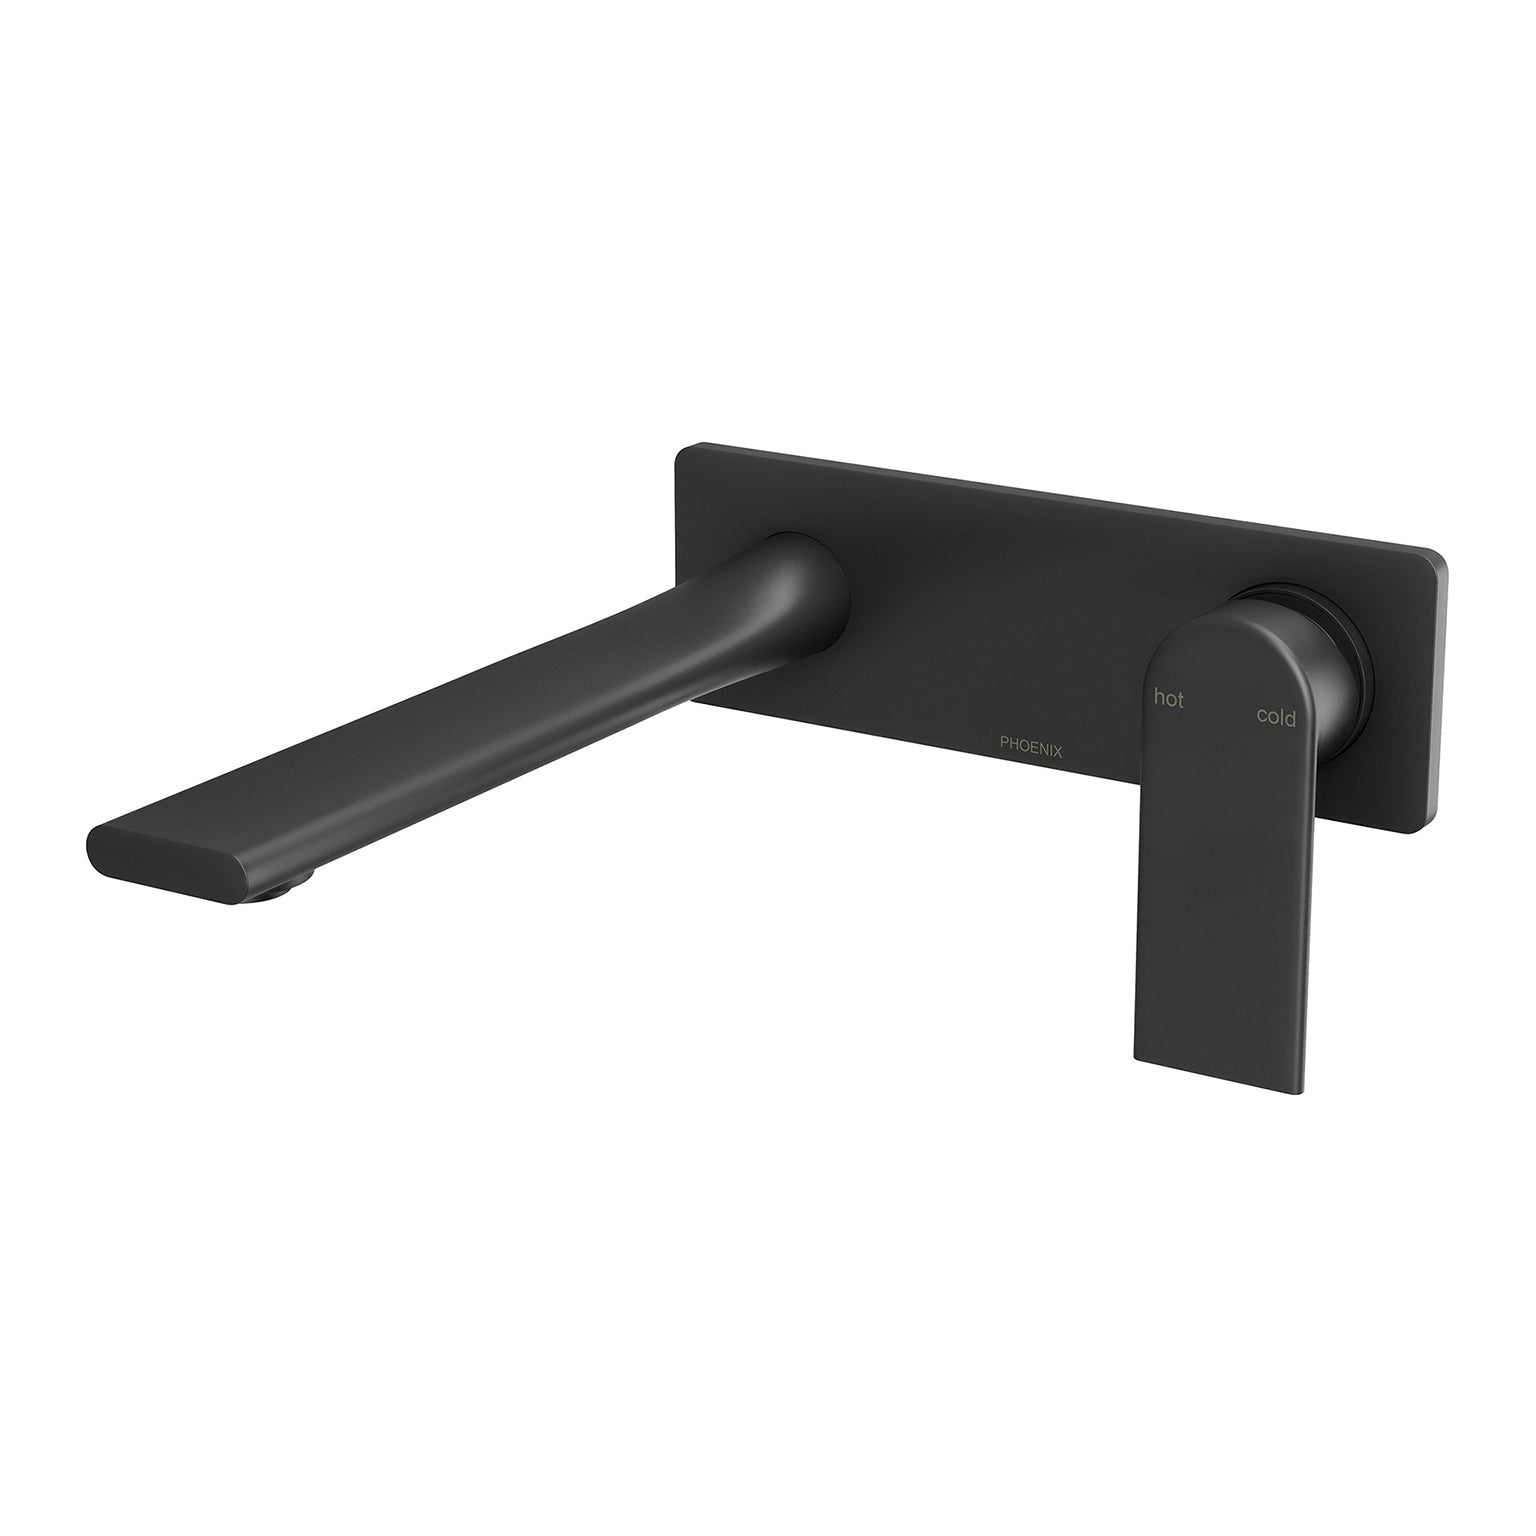 PHOENIX TEEL SWITCHMIX WALL BASIN / BATH MIXER SET FIT-OFF AND ROUGH-IN KIT 200MM MATTE BLACK